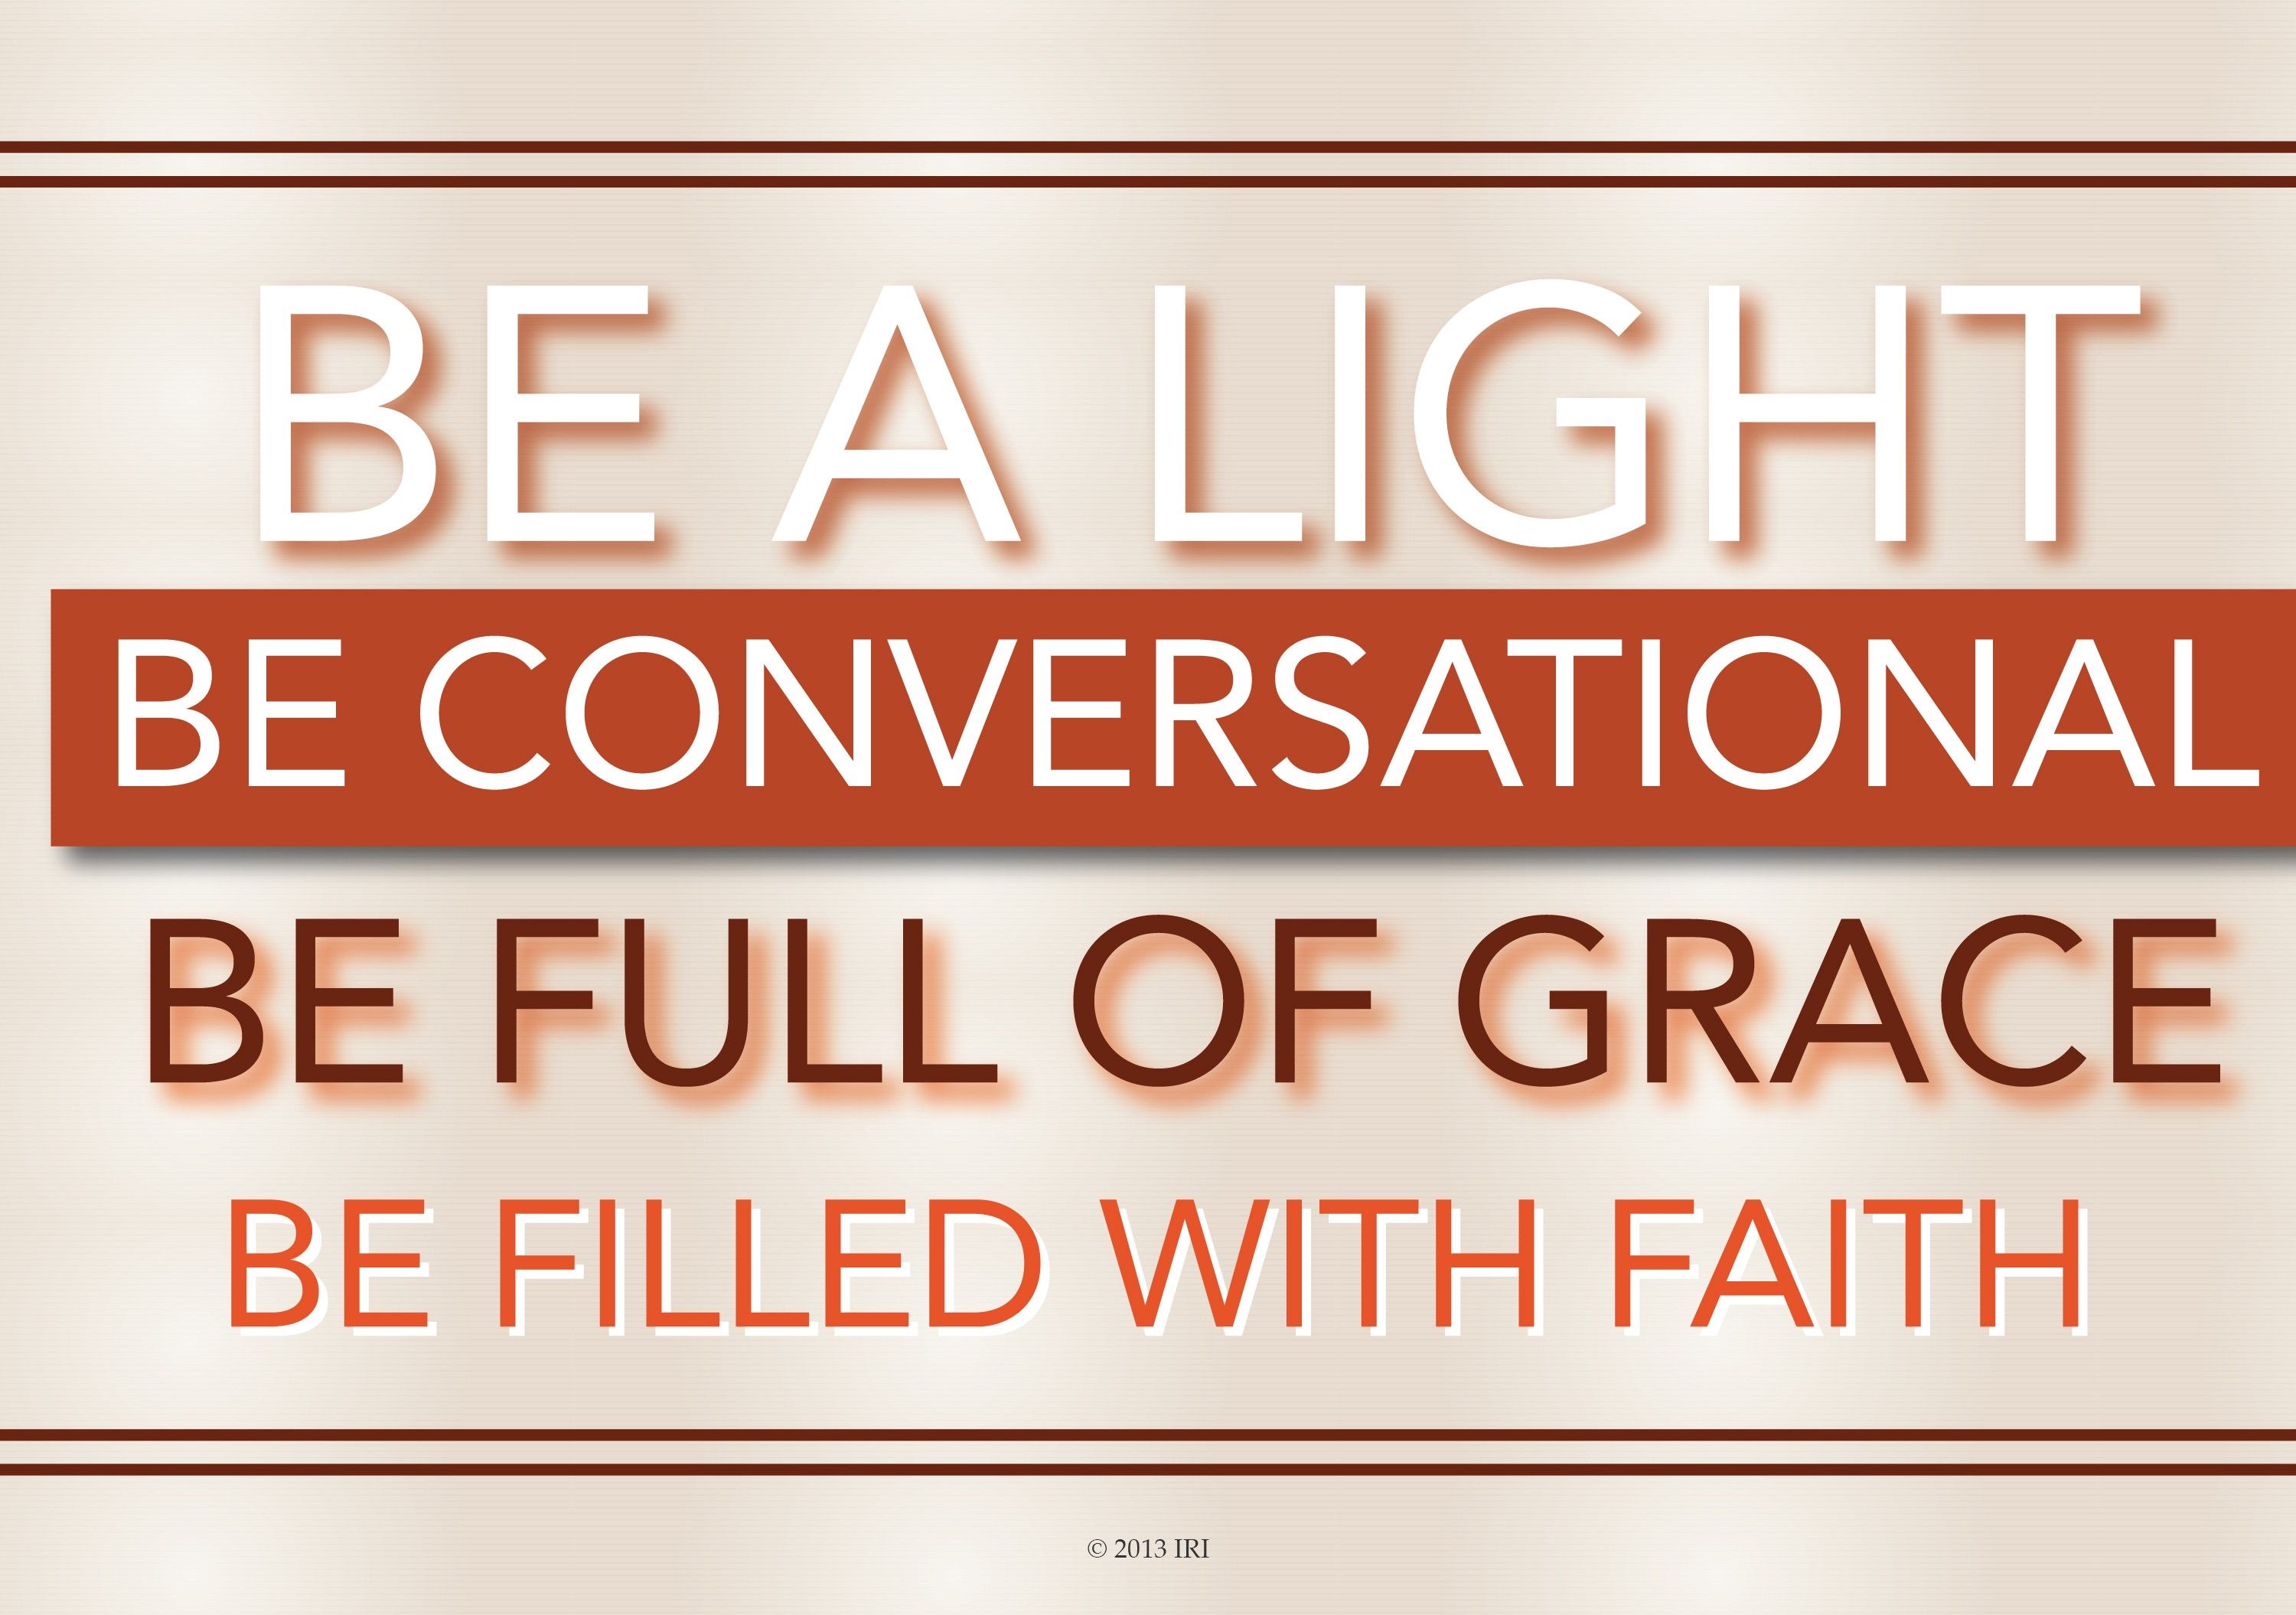 “Be a light. Be conversational. Be full of grace. Be filled with faith.”